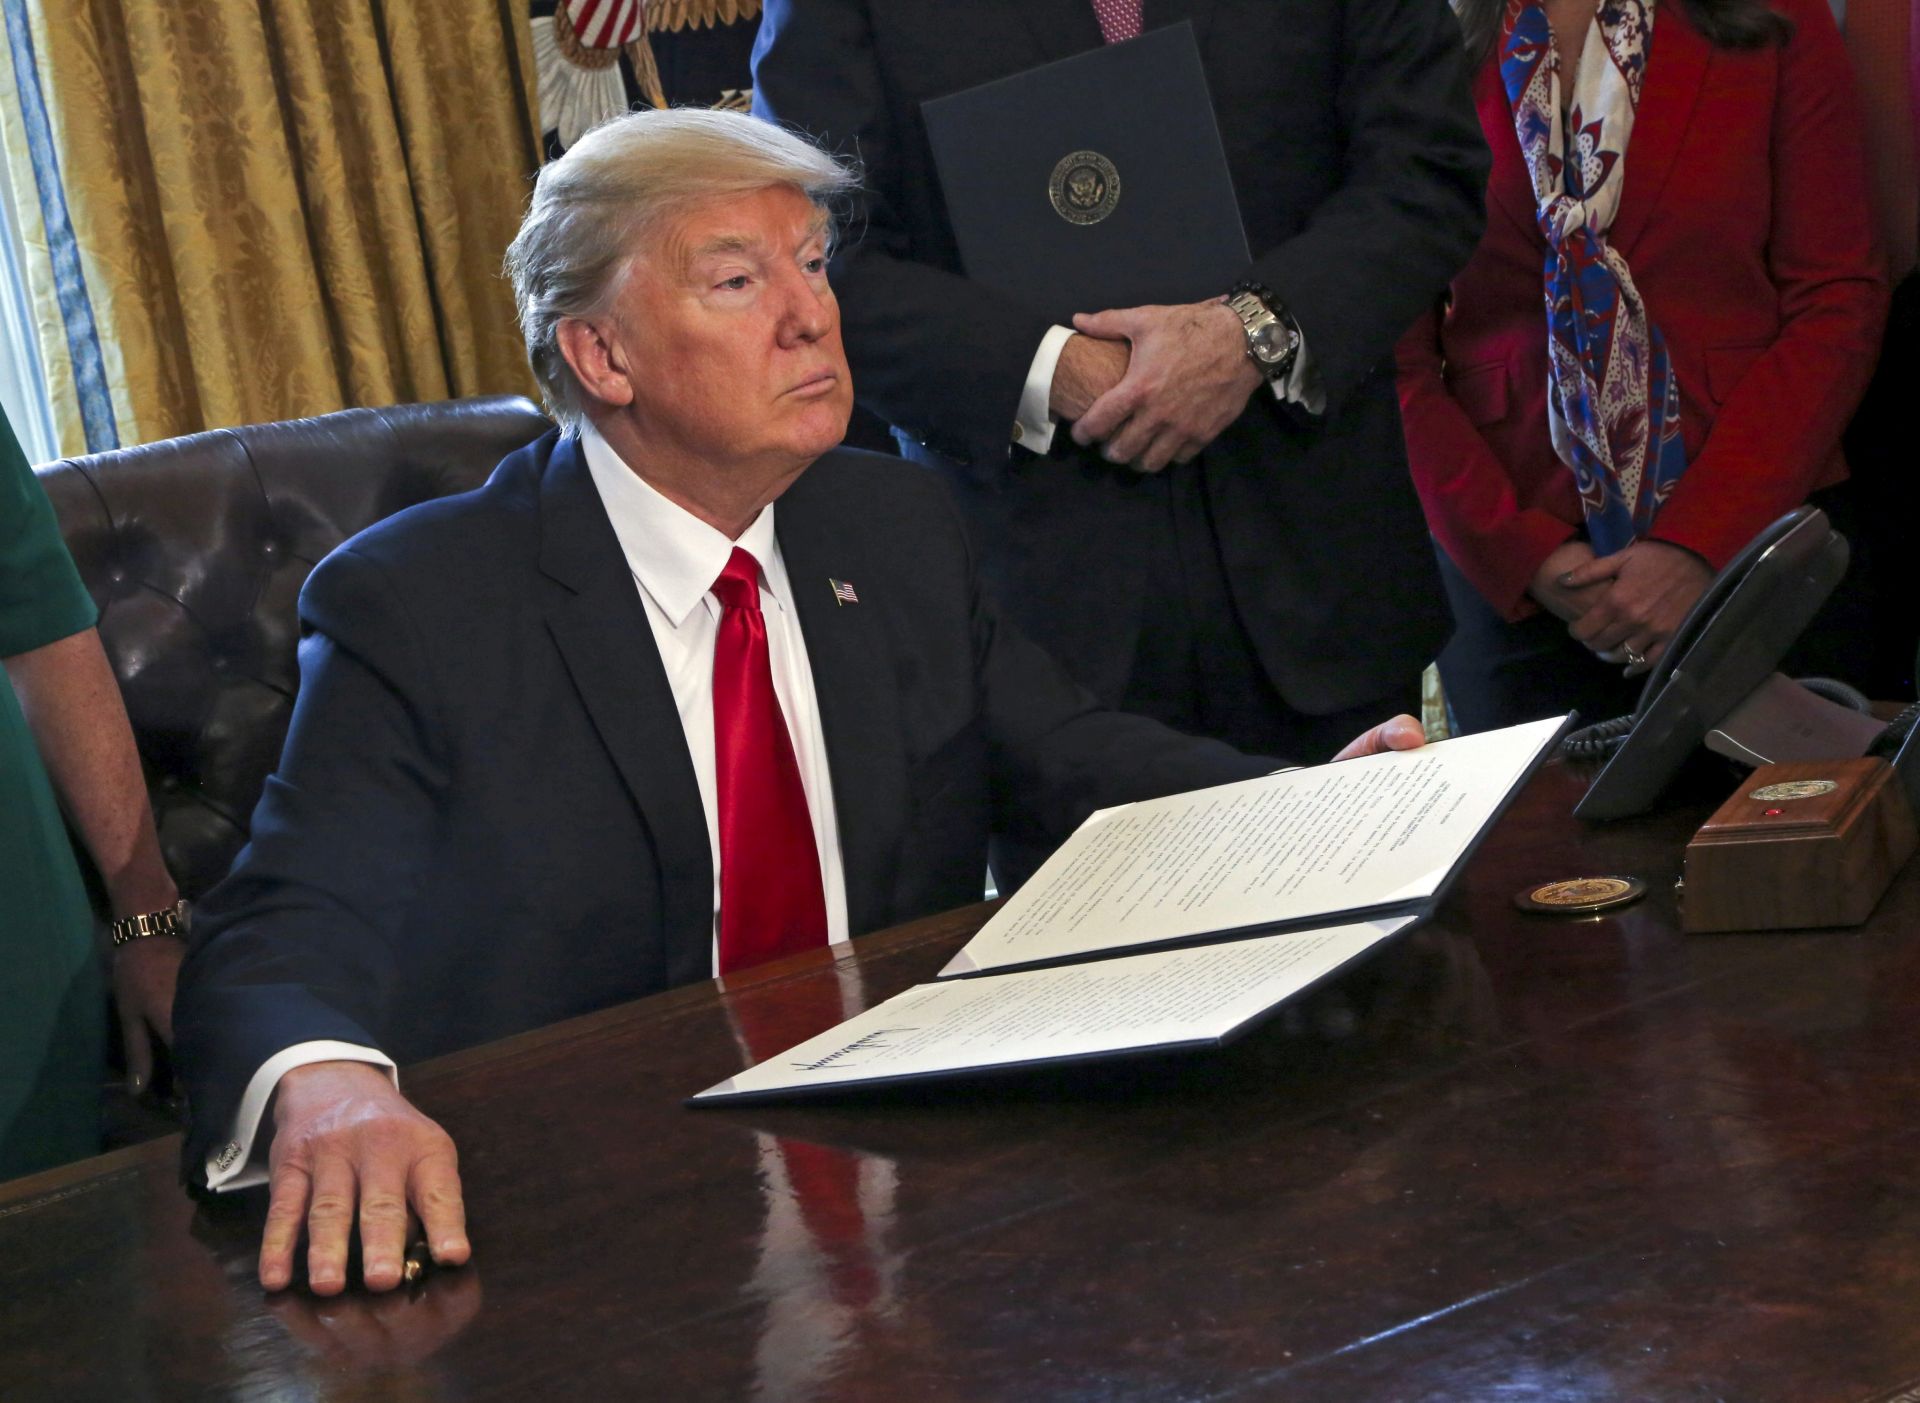 epa05769557 US President Donald J. Trump poses after signing an executive order in the Oval Office of the White House, in Washington, DC, USA, 03 February 2017. Trump signed several executive orders including an order to review the Dodd-Frank Wall Street to roll back financial regulations of the Obama era.  EPA/Aude Guerrucci / POOL